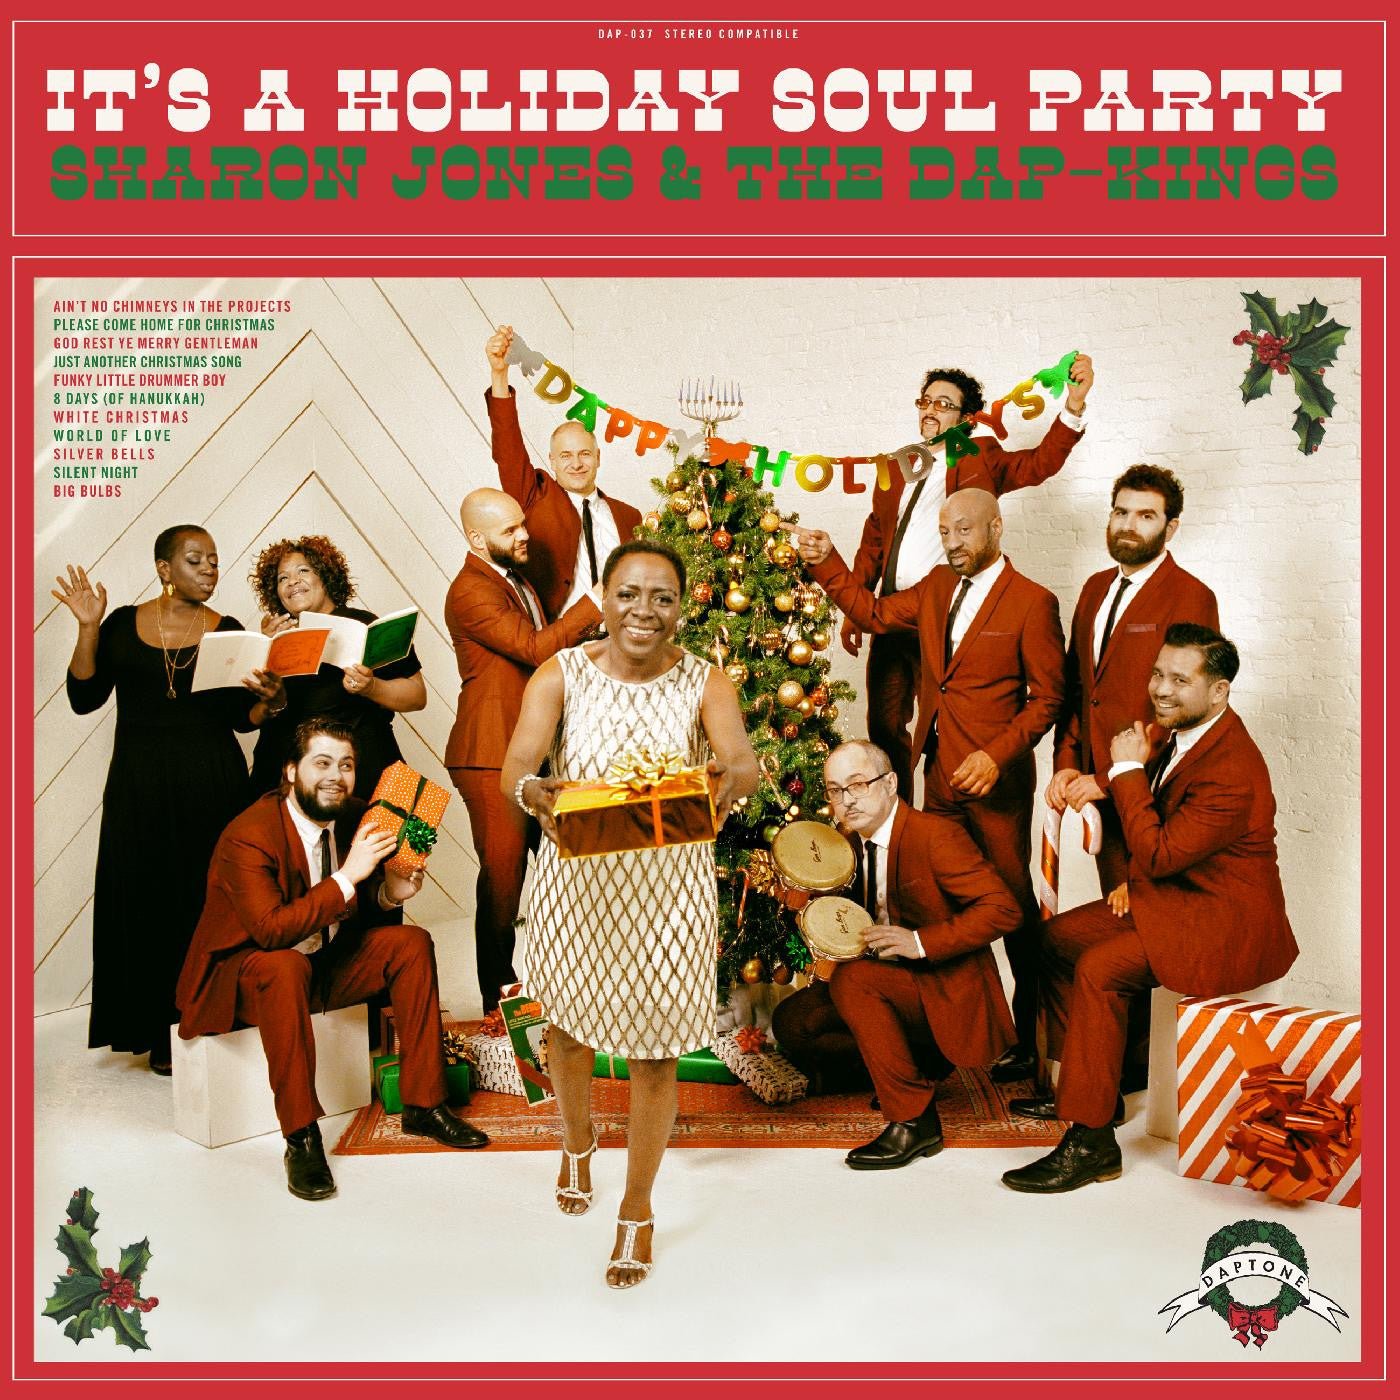 Jones, Sharon & The Dap-Kings - It's A Holiday Soul Party (Candy Cane Color Vinyl) - 823134993716 - LP's - Yellow Racket Records